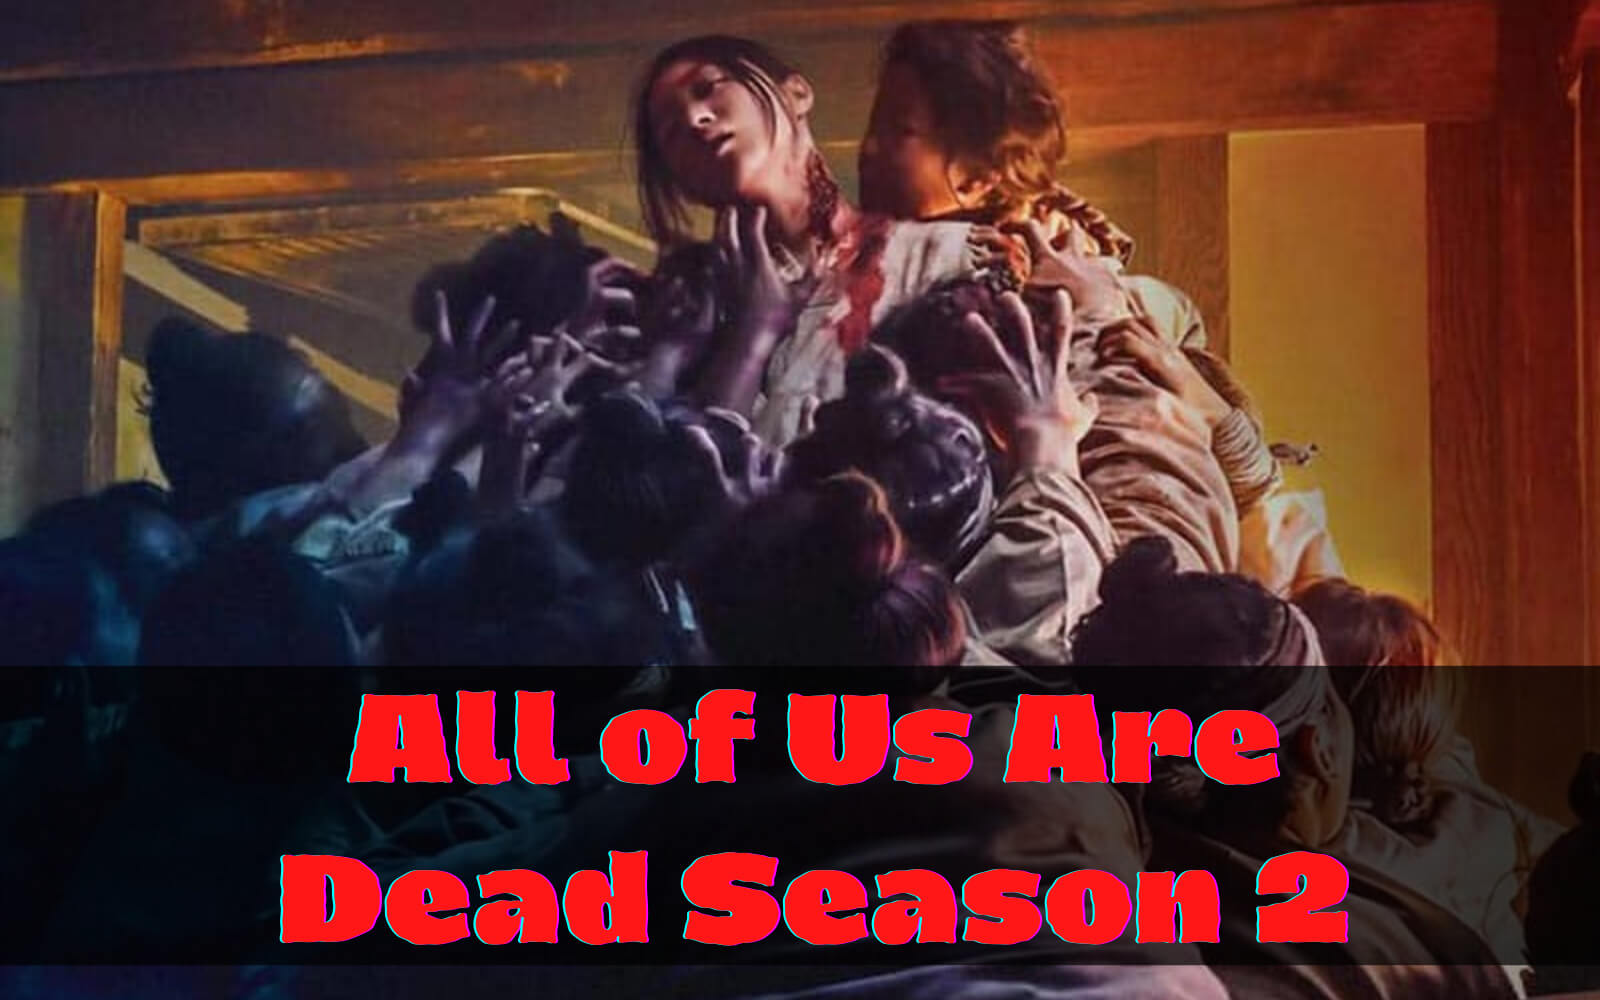 All Of Us Are Dead Season 2 Confirmed, Cast & Airing Date TBA